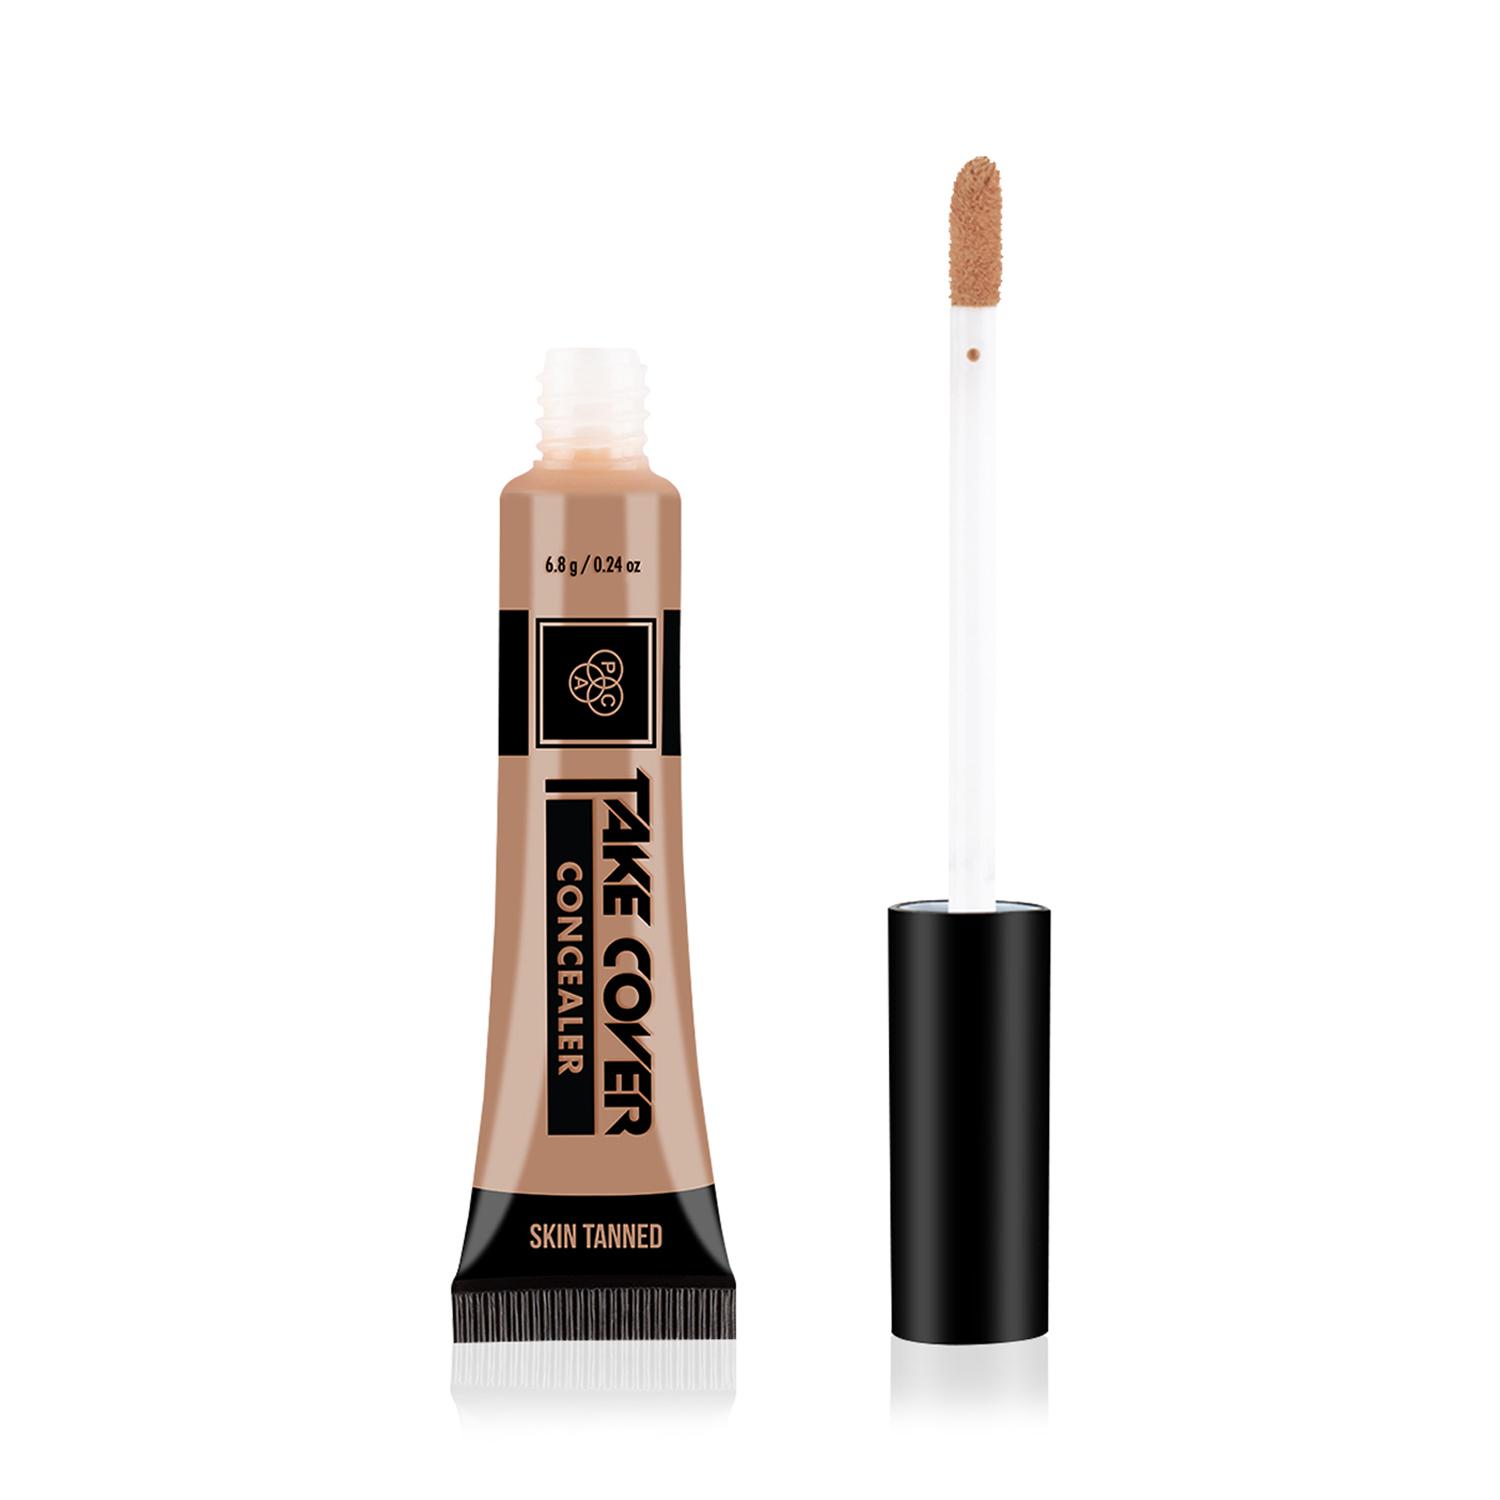 PAC | PAC Take Cover Concealer - 07 Skin Tanned (6.8g)